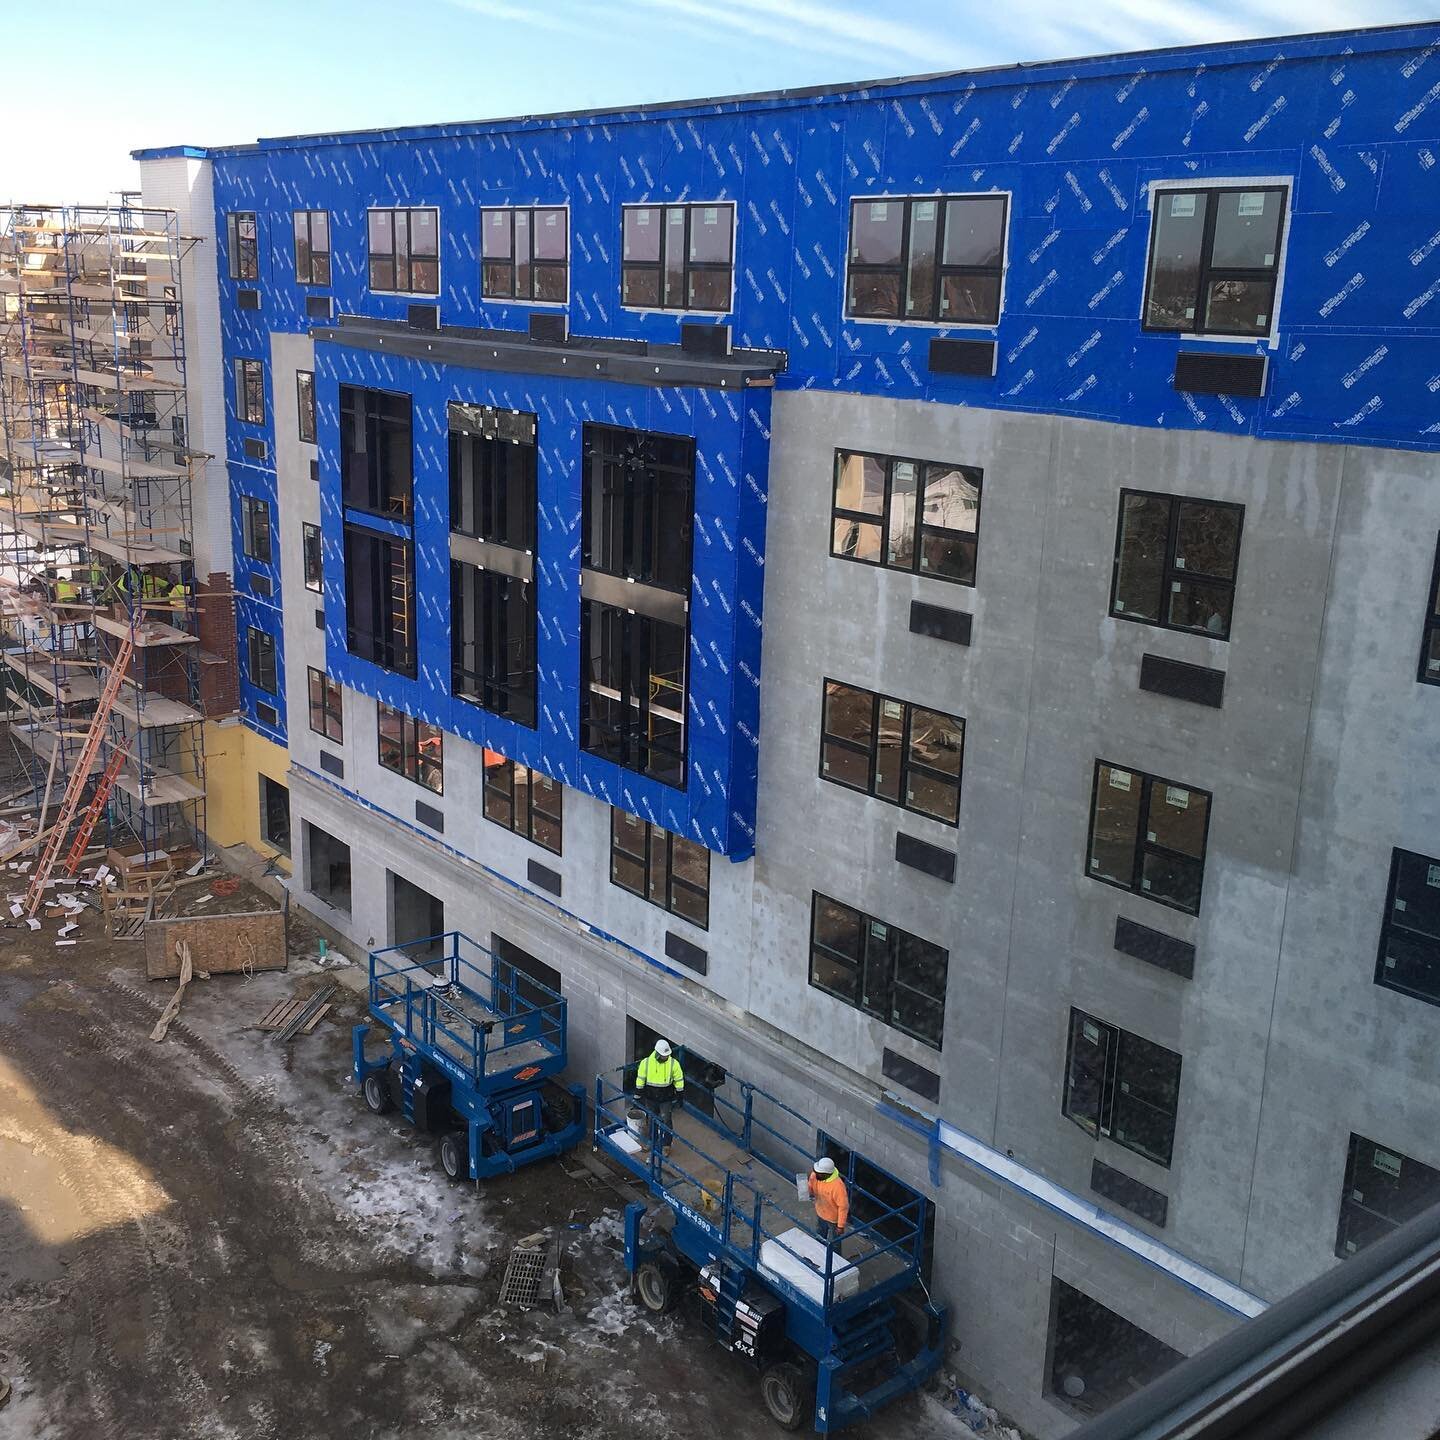 Site stop by last week at our 90 unit multi-family project. #BAprojects #architects #longisland #newyork #southshore #florida #orlando #apartment #bayshore #construction #going #building #multifamily #design #process #progress